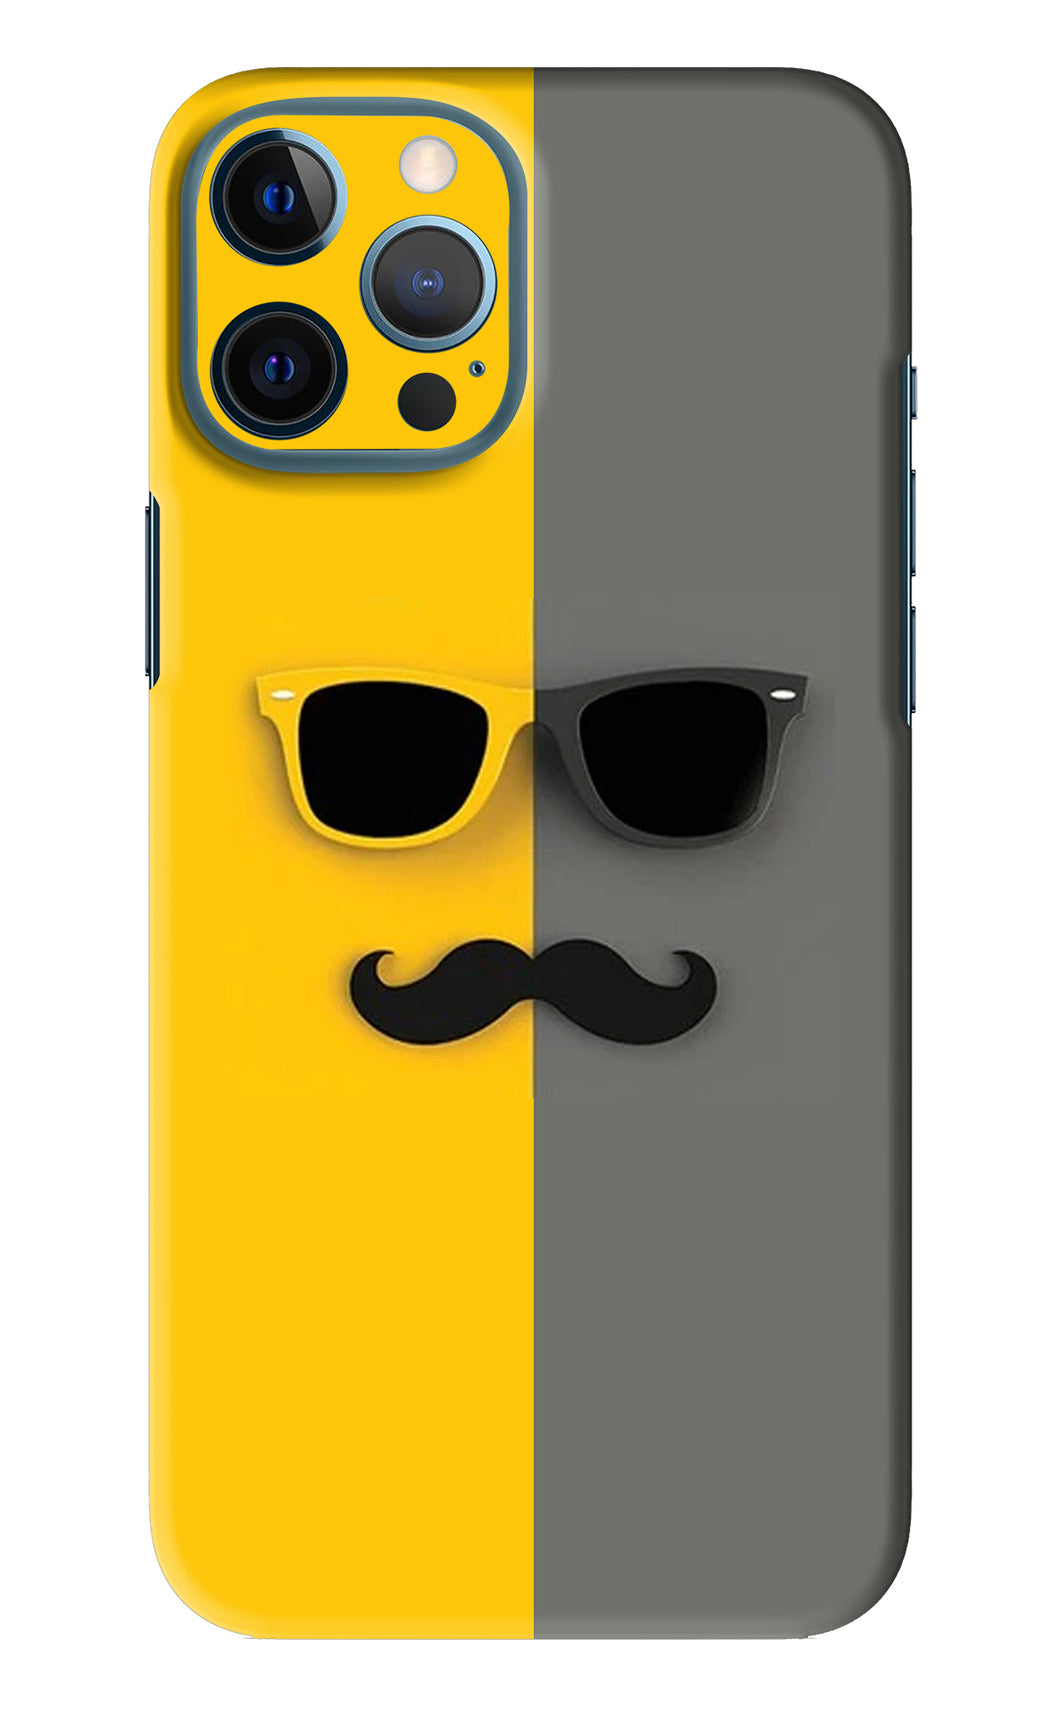 Sunglasses with Mustache iPhone 12 Pro Max Back Skin Wrap